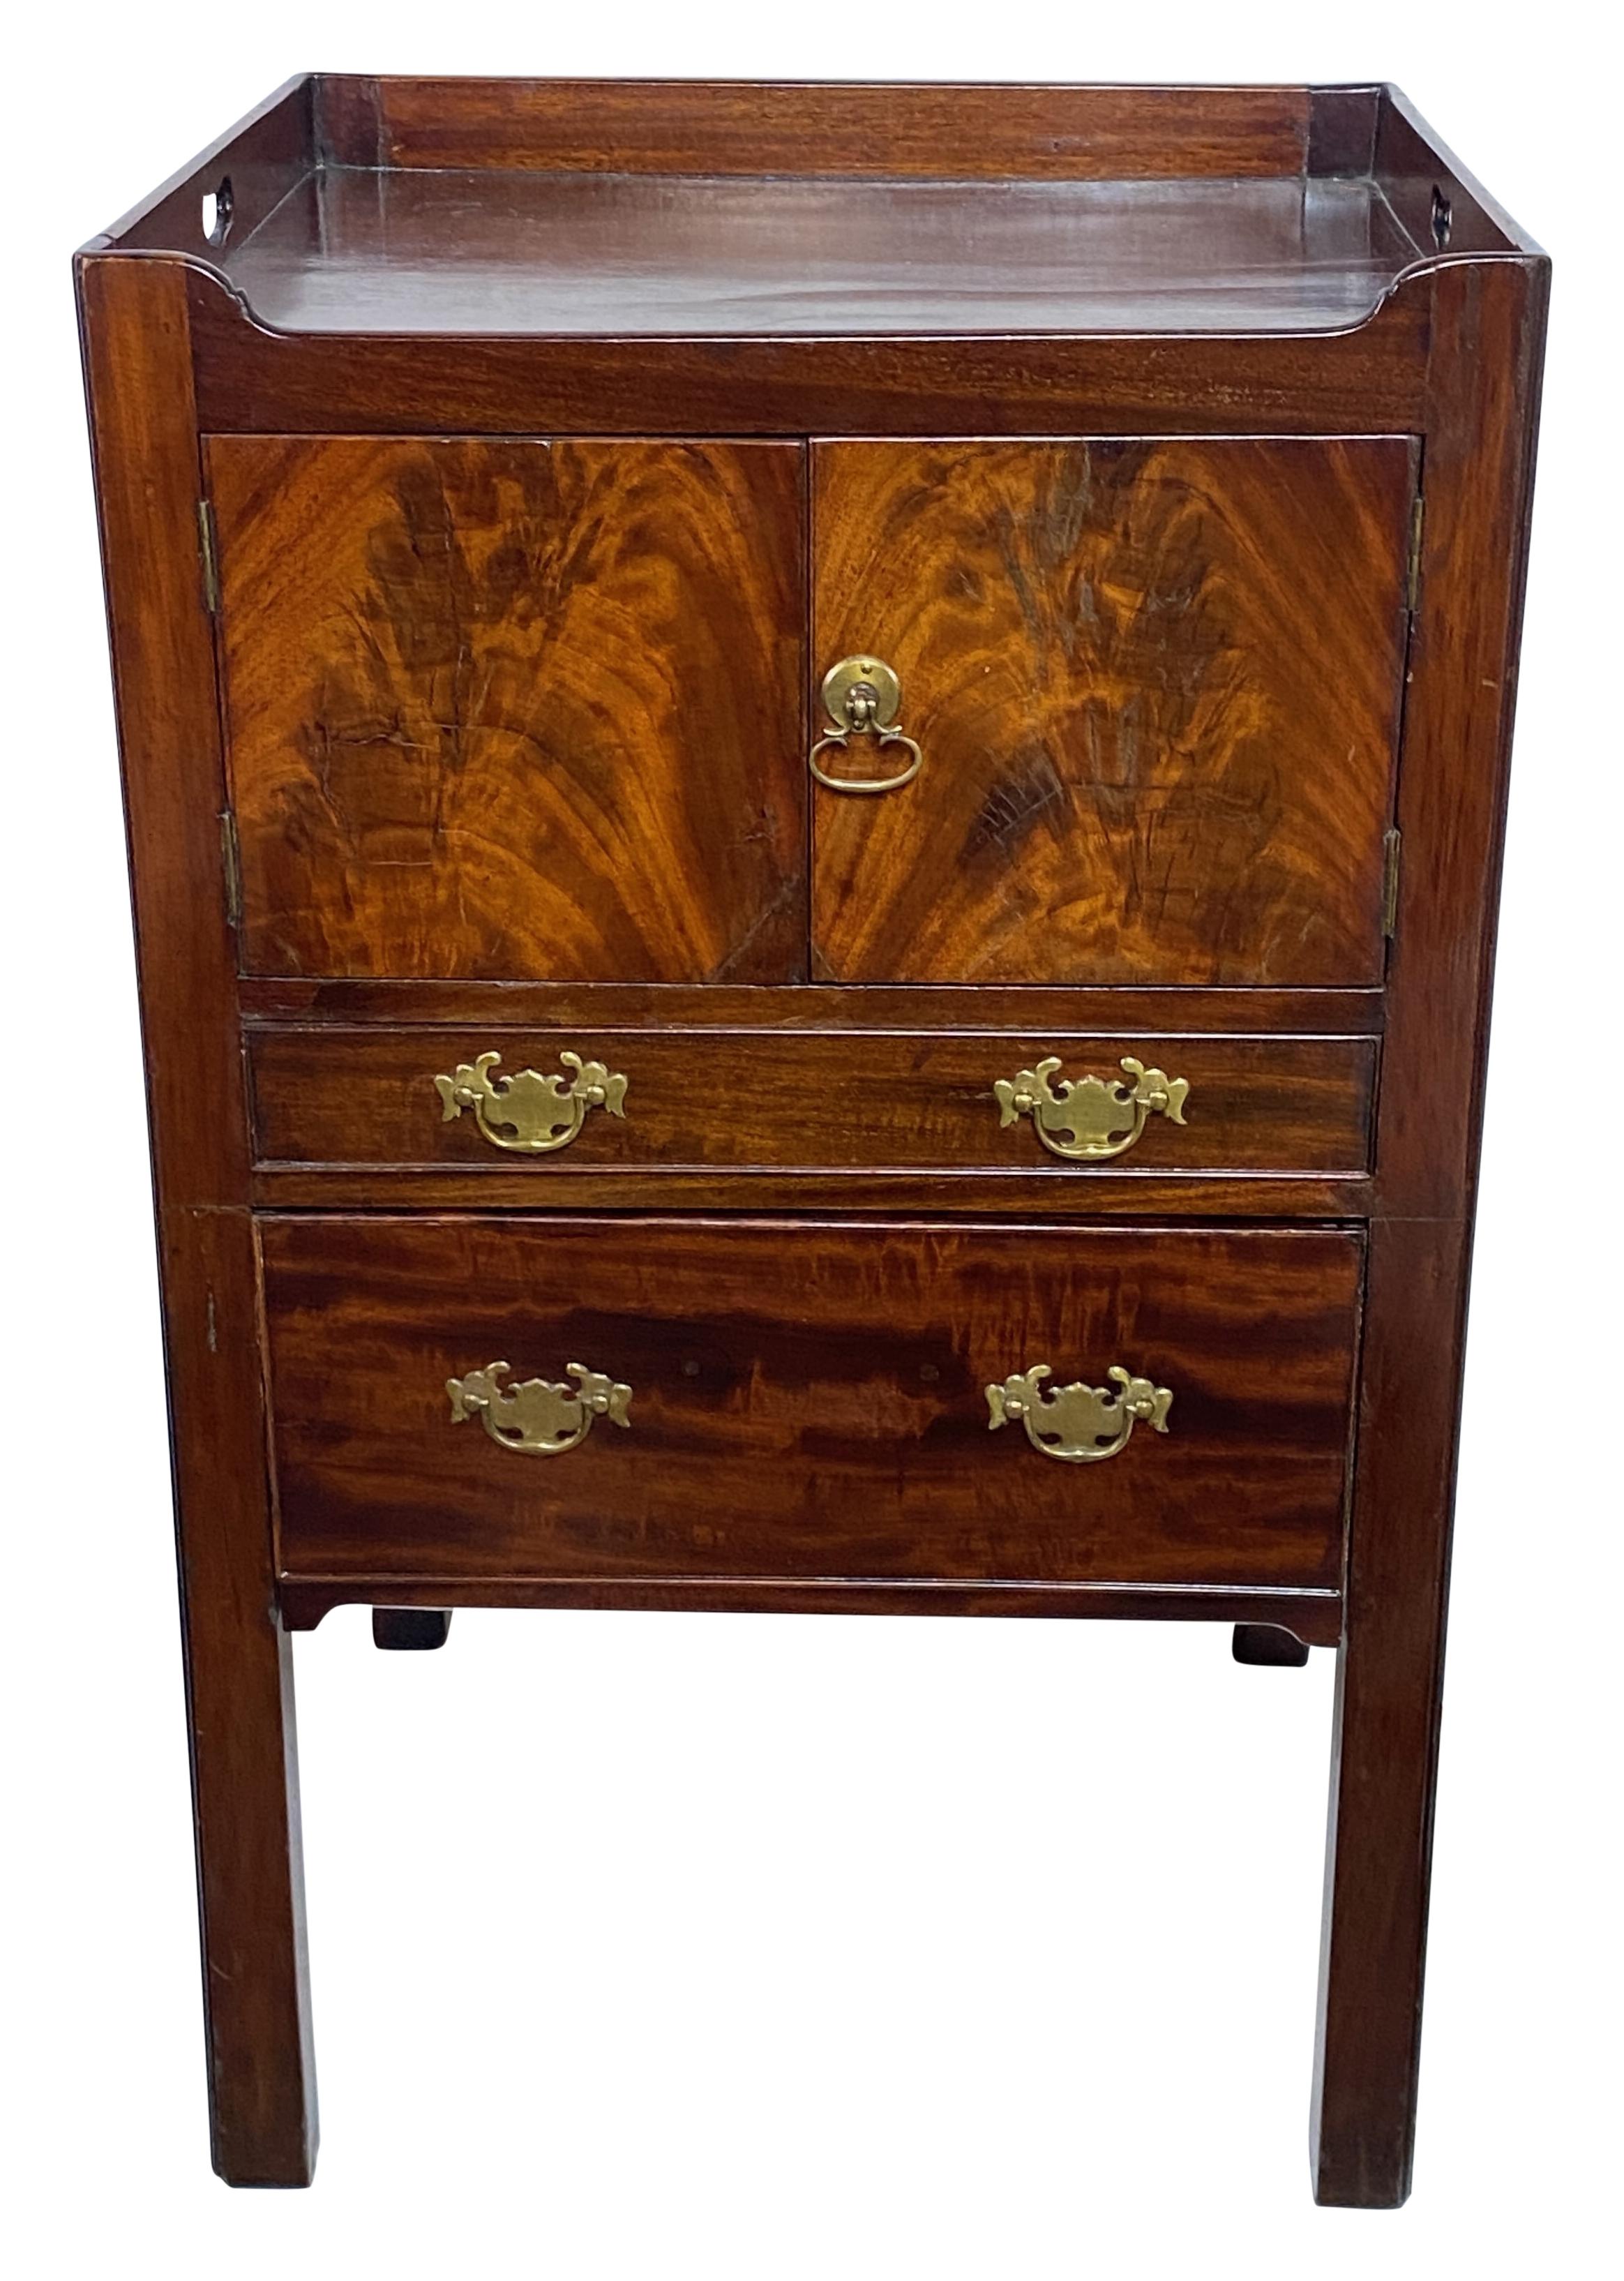 George III mahogany bedside cabinet table commode in original condition and with original finish.
In very good antique condition with some minor stress cracks as is typical of a piece with this age.
England, early 19th century.